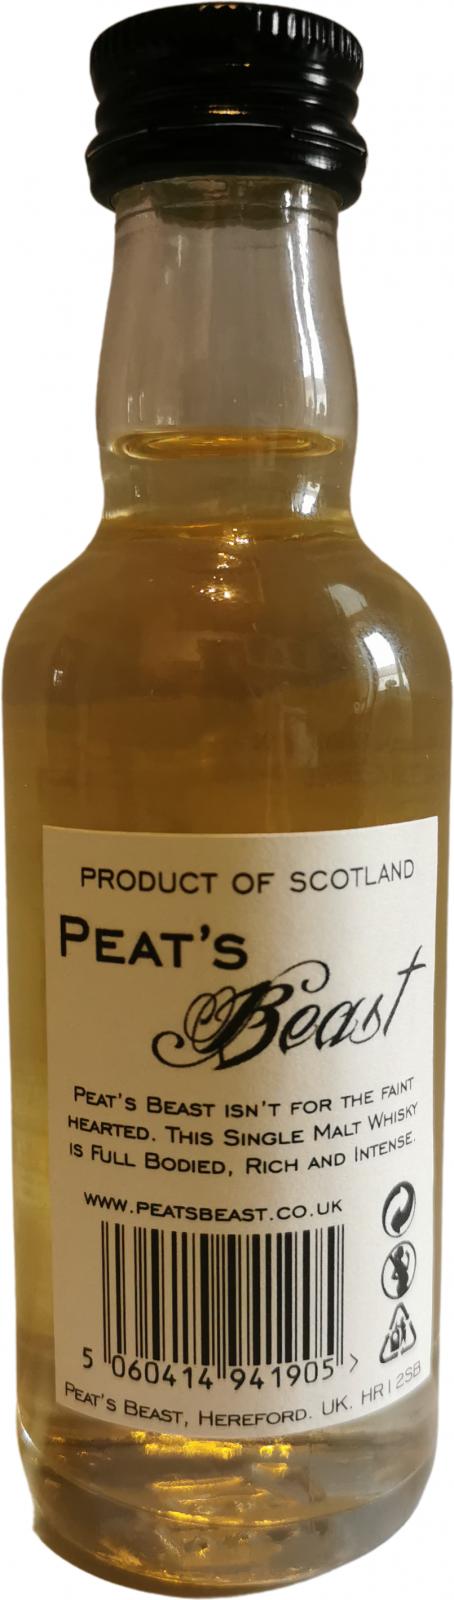 Peat's Beast Intensely Peated FF